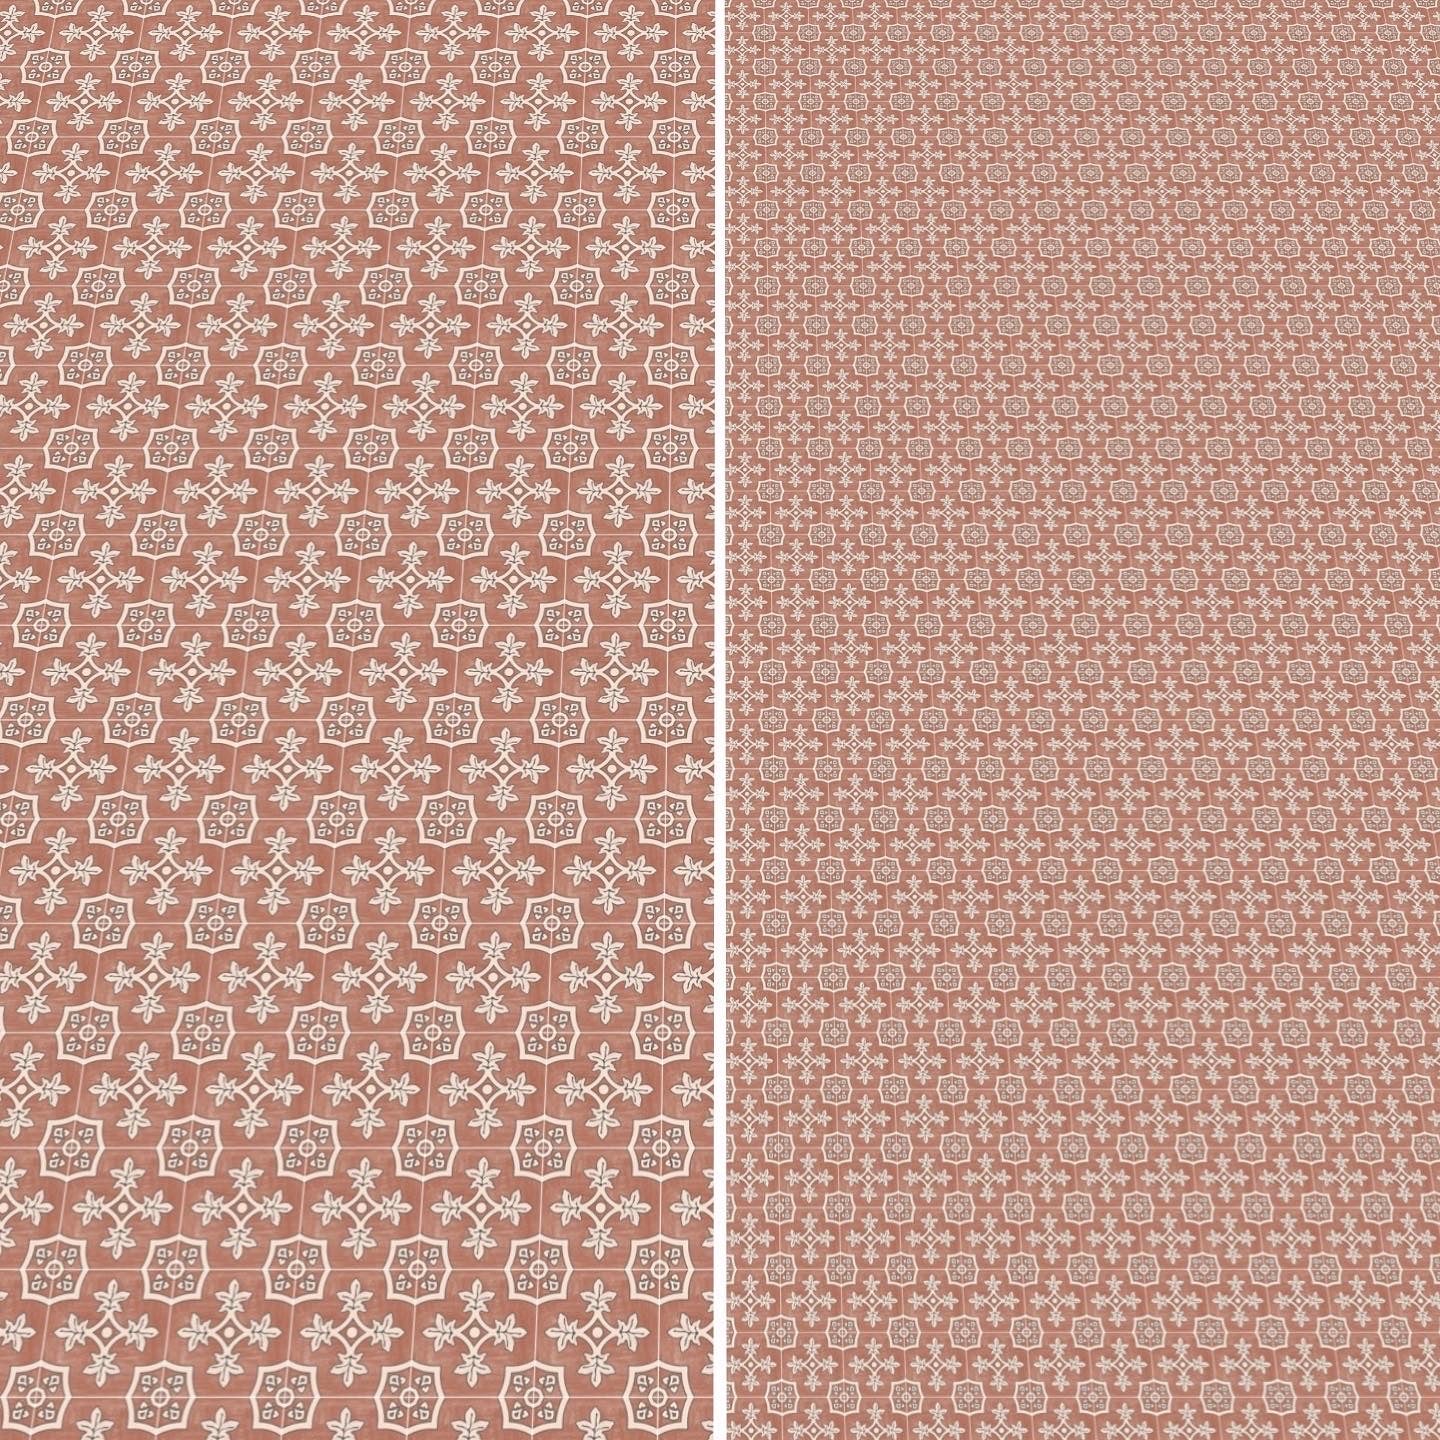 Rusty Red and Cream Paper Tile